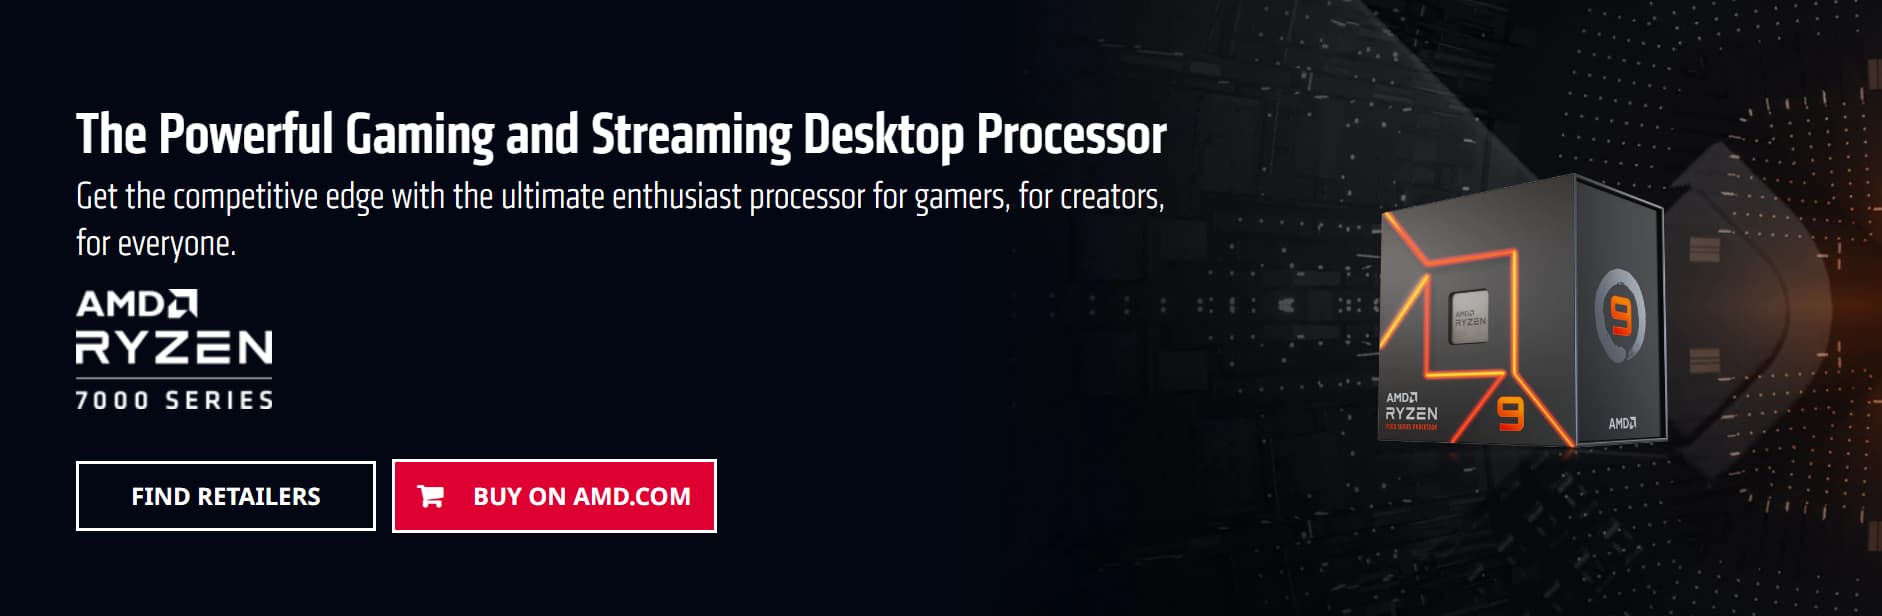 AMD Website after product launch